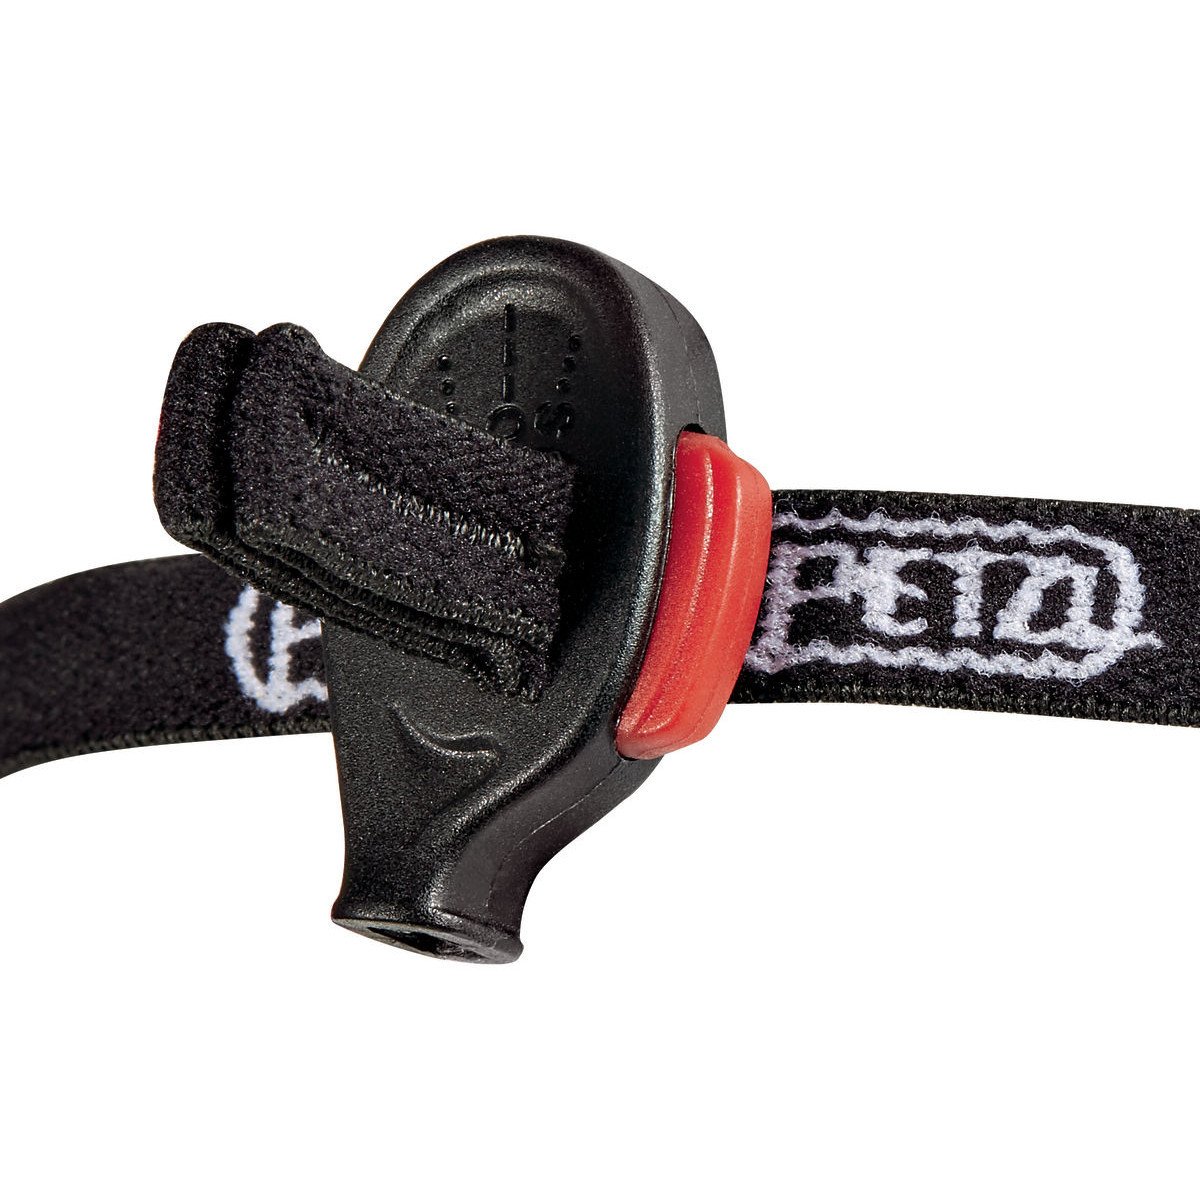 Petzl e+LITE head torch, close up of the reverse side of the lamp